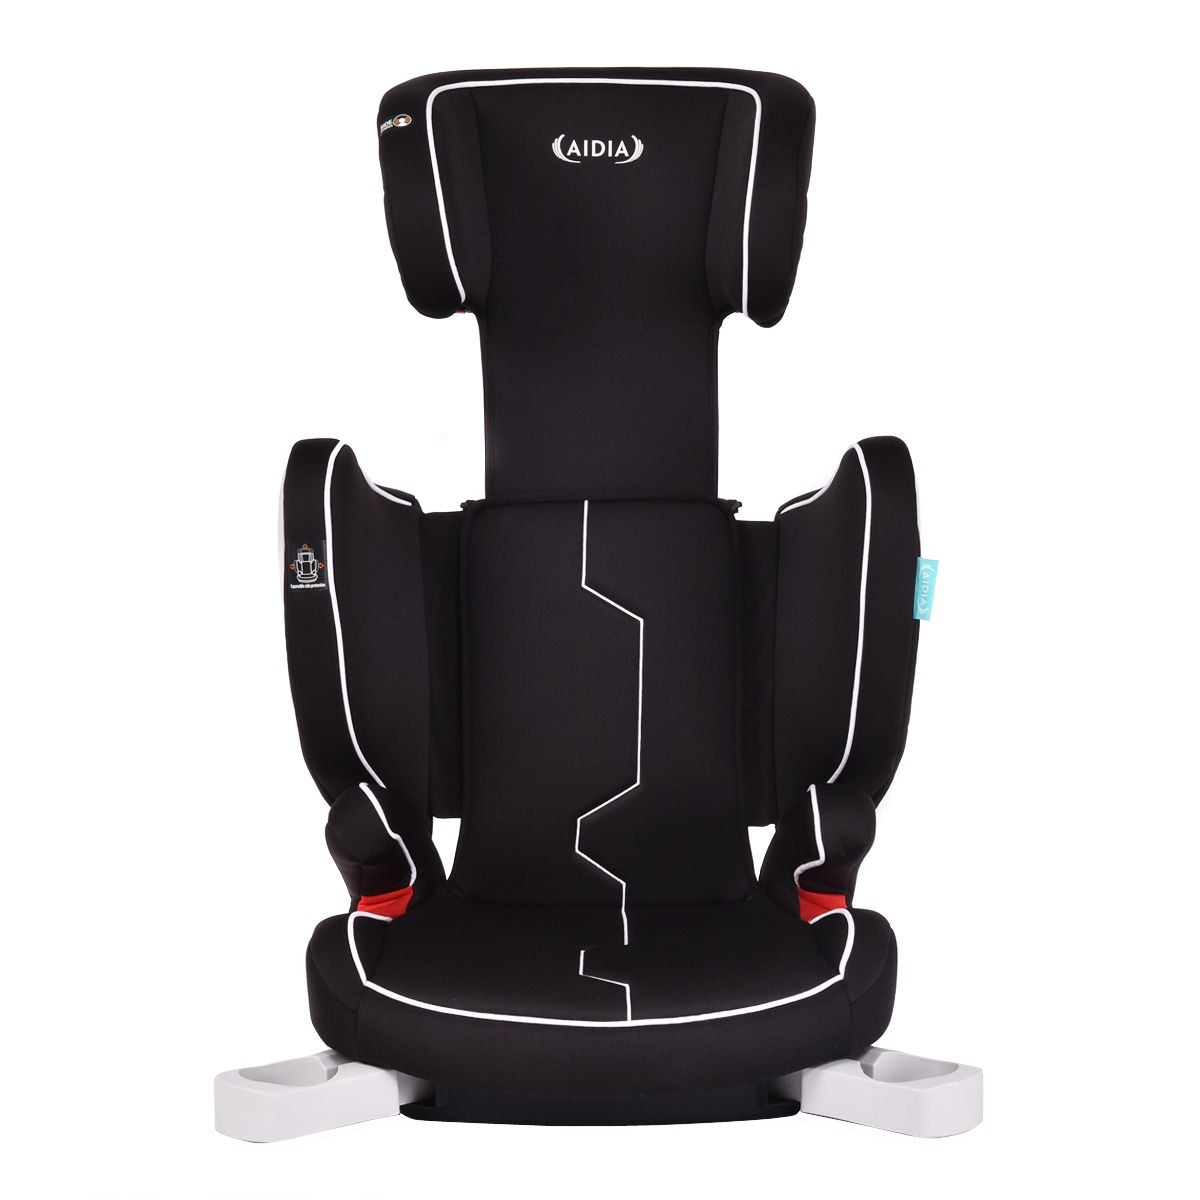 baby car seat with cup holder